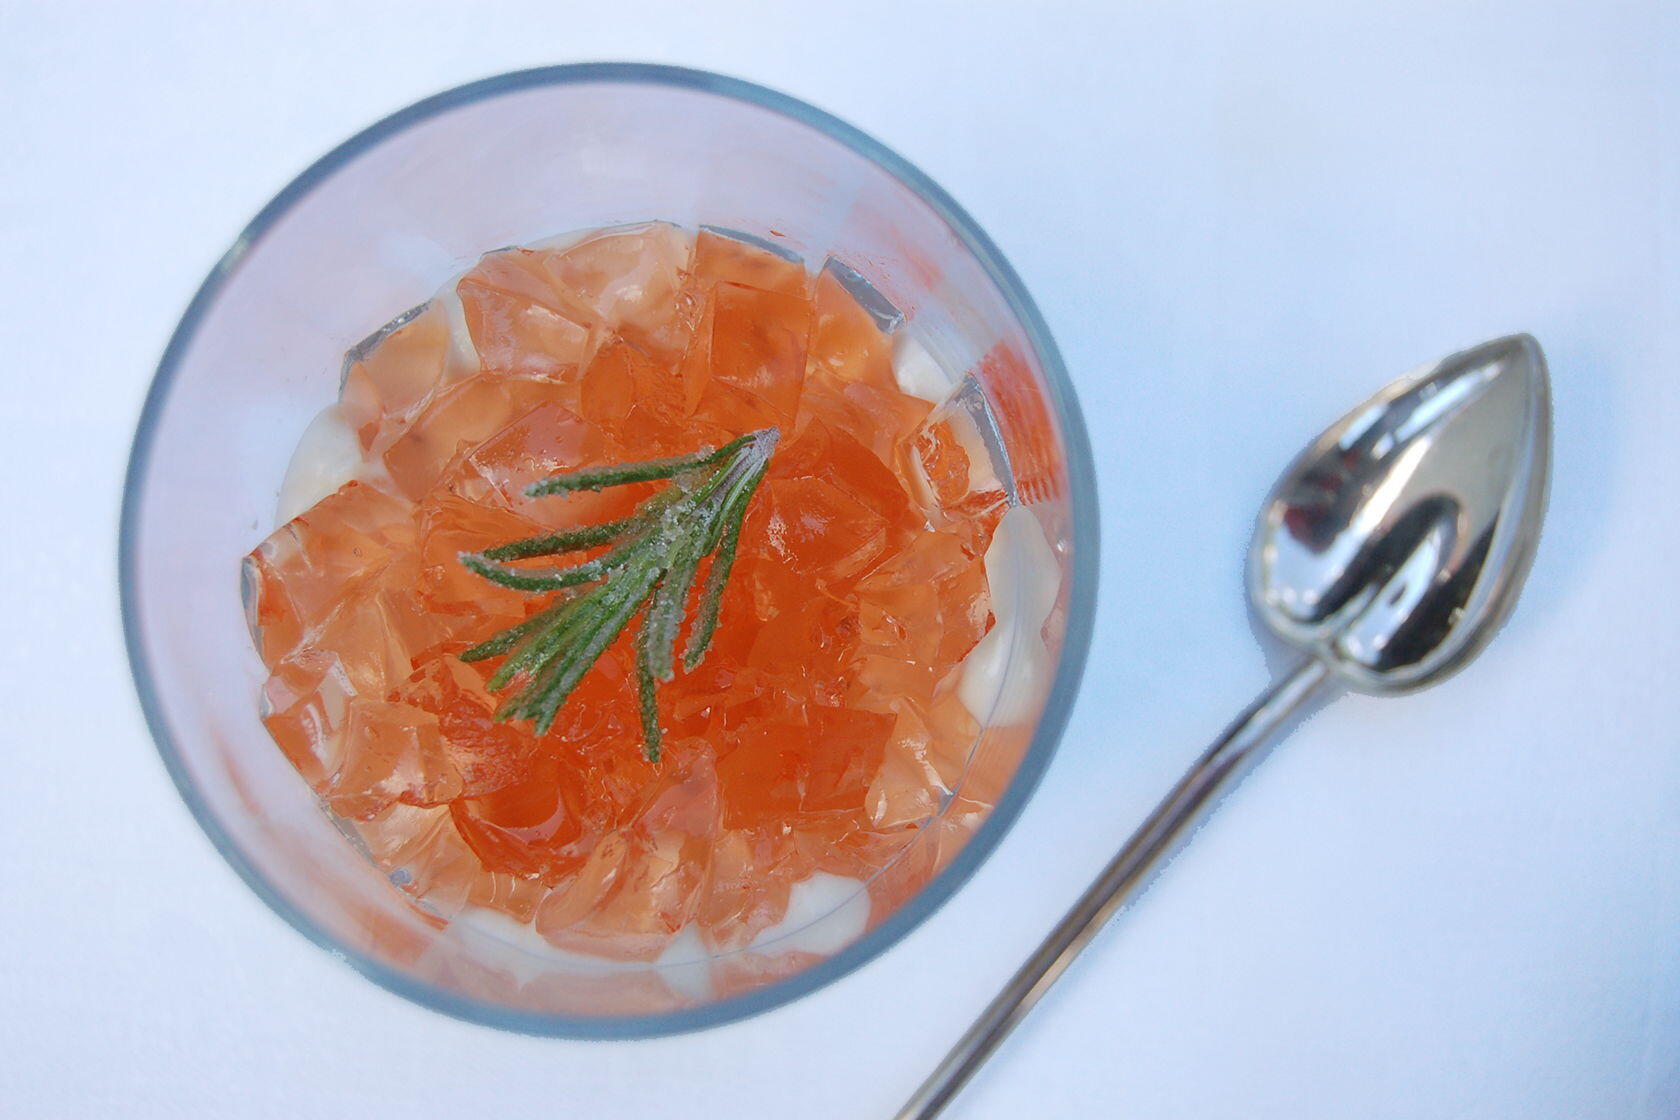 Verrine of Cambozola Mousse, Spiced Rosé Gelée, and Crystalized Rosemary